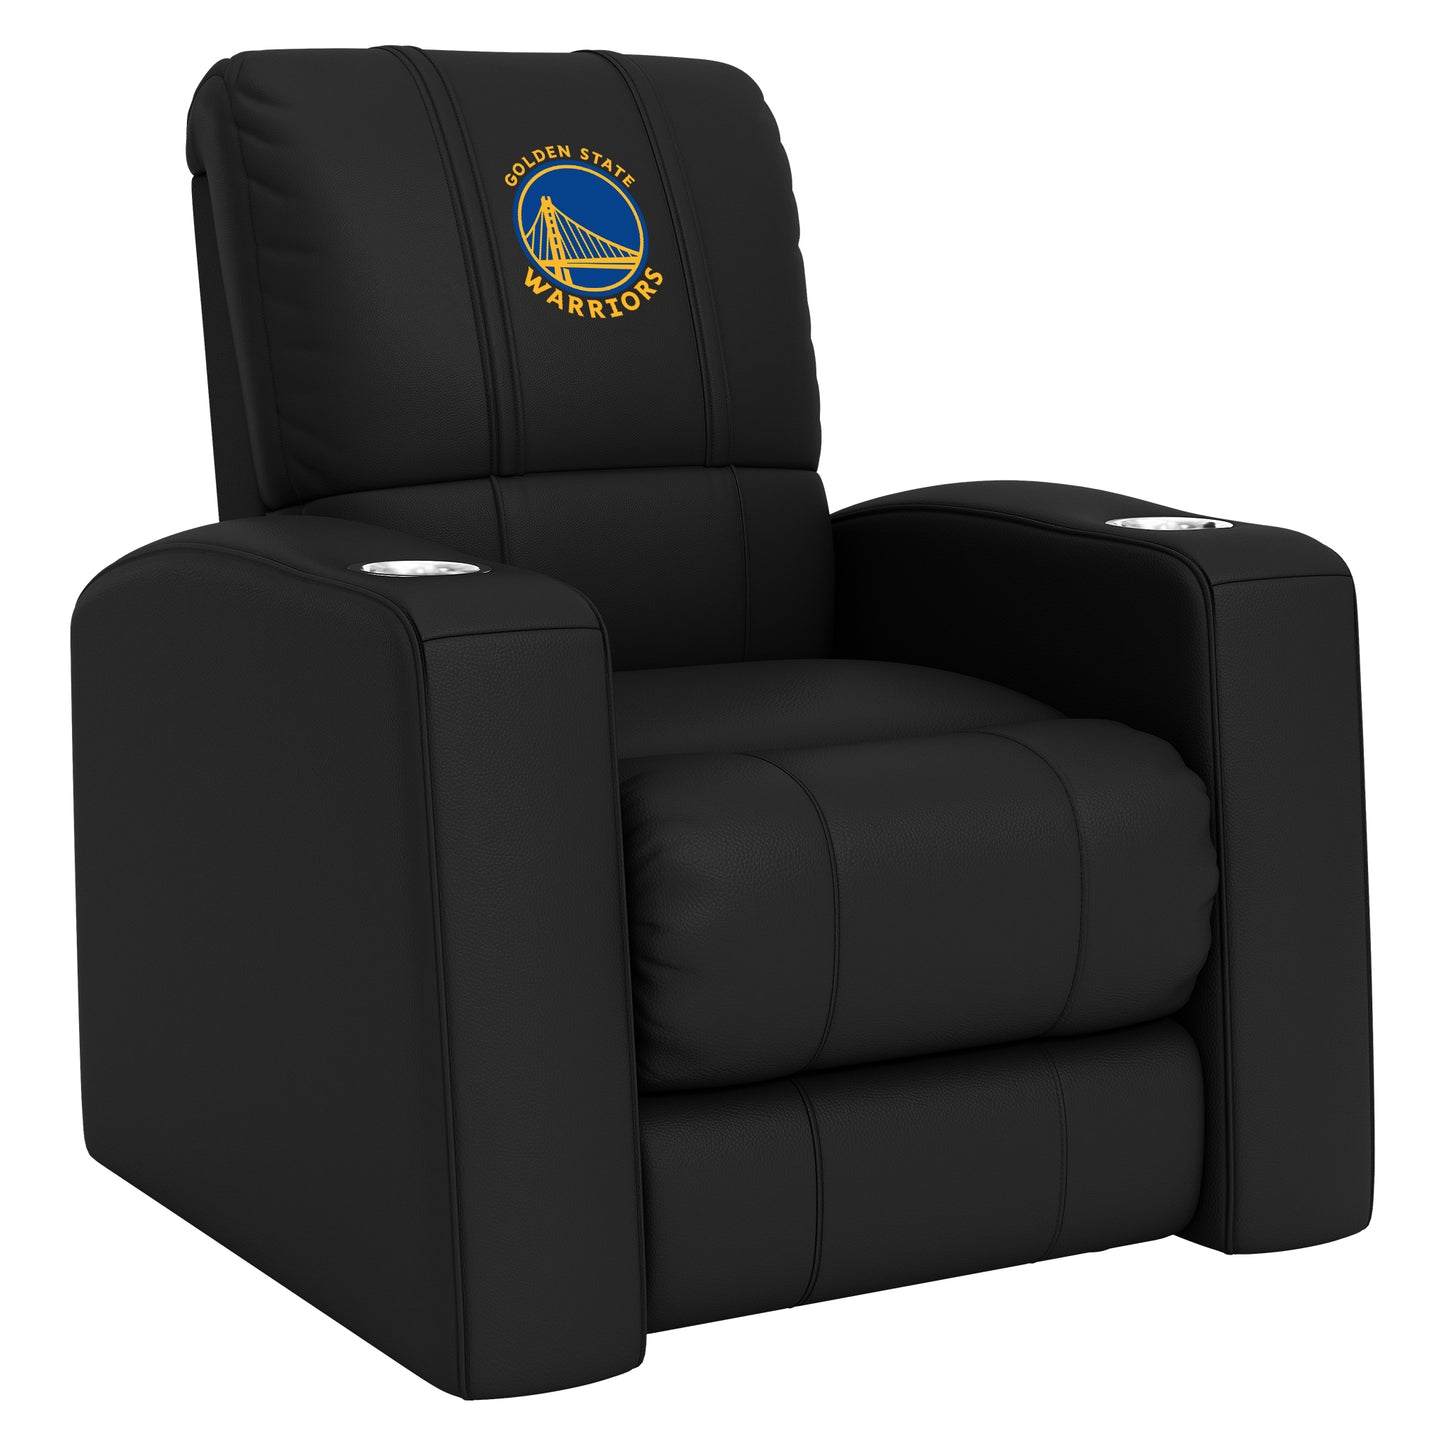 Relax Home Theater Recliner with Golden State Warriors Global Logo